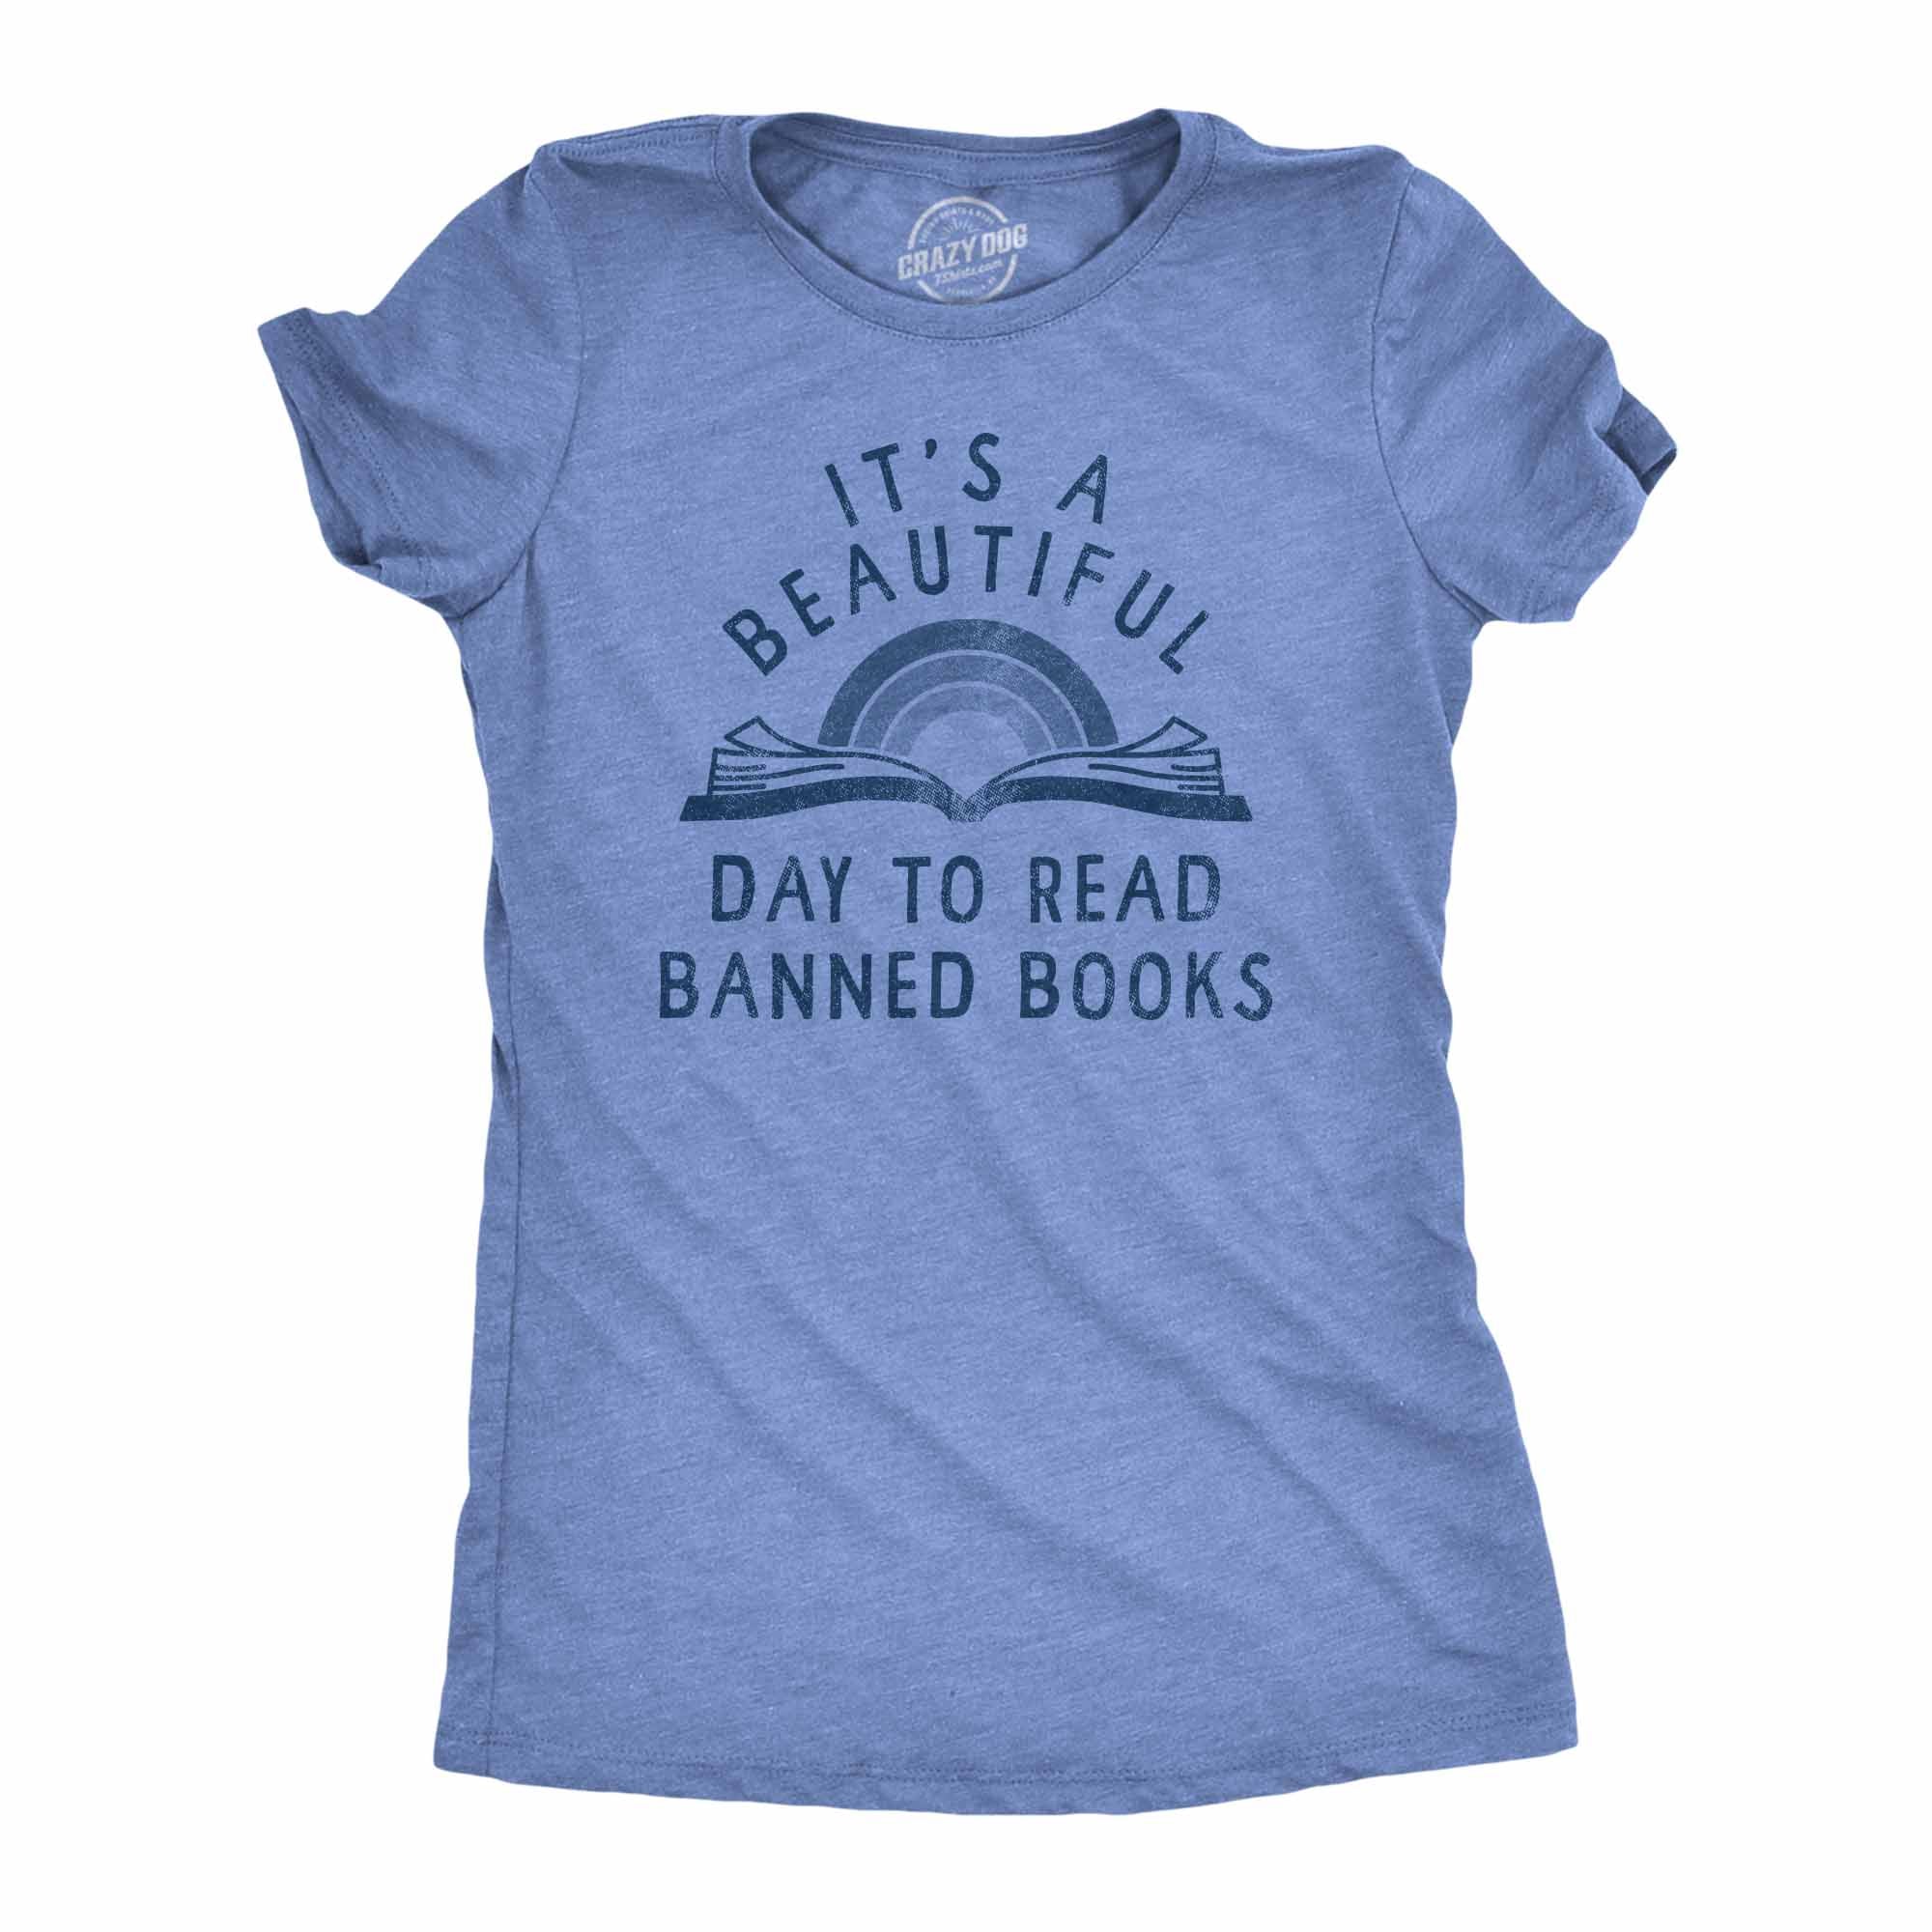 Funny Light Heather Blue - BANNED Its A Beautiful Day To Read Banned Books Womens T Shirt Nerdy Nerdy Tee